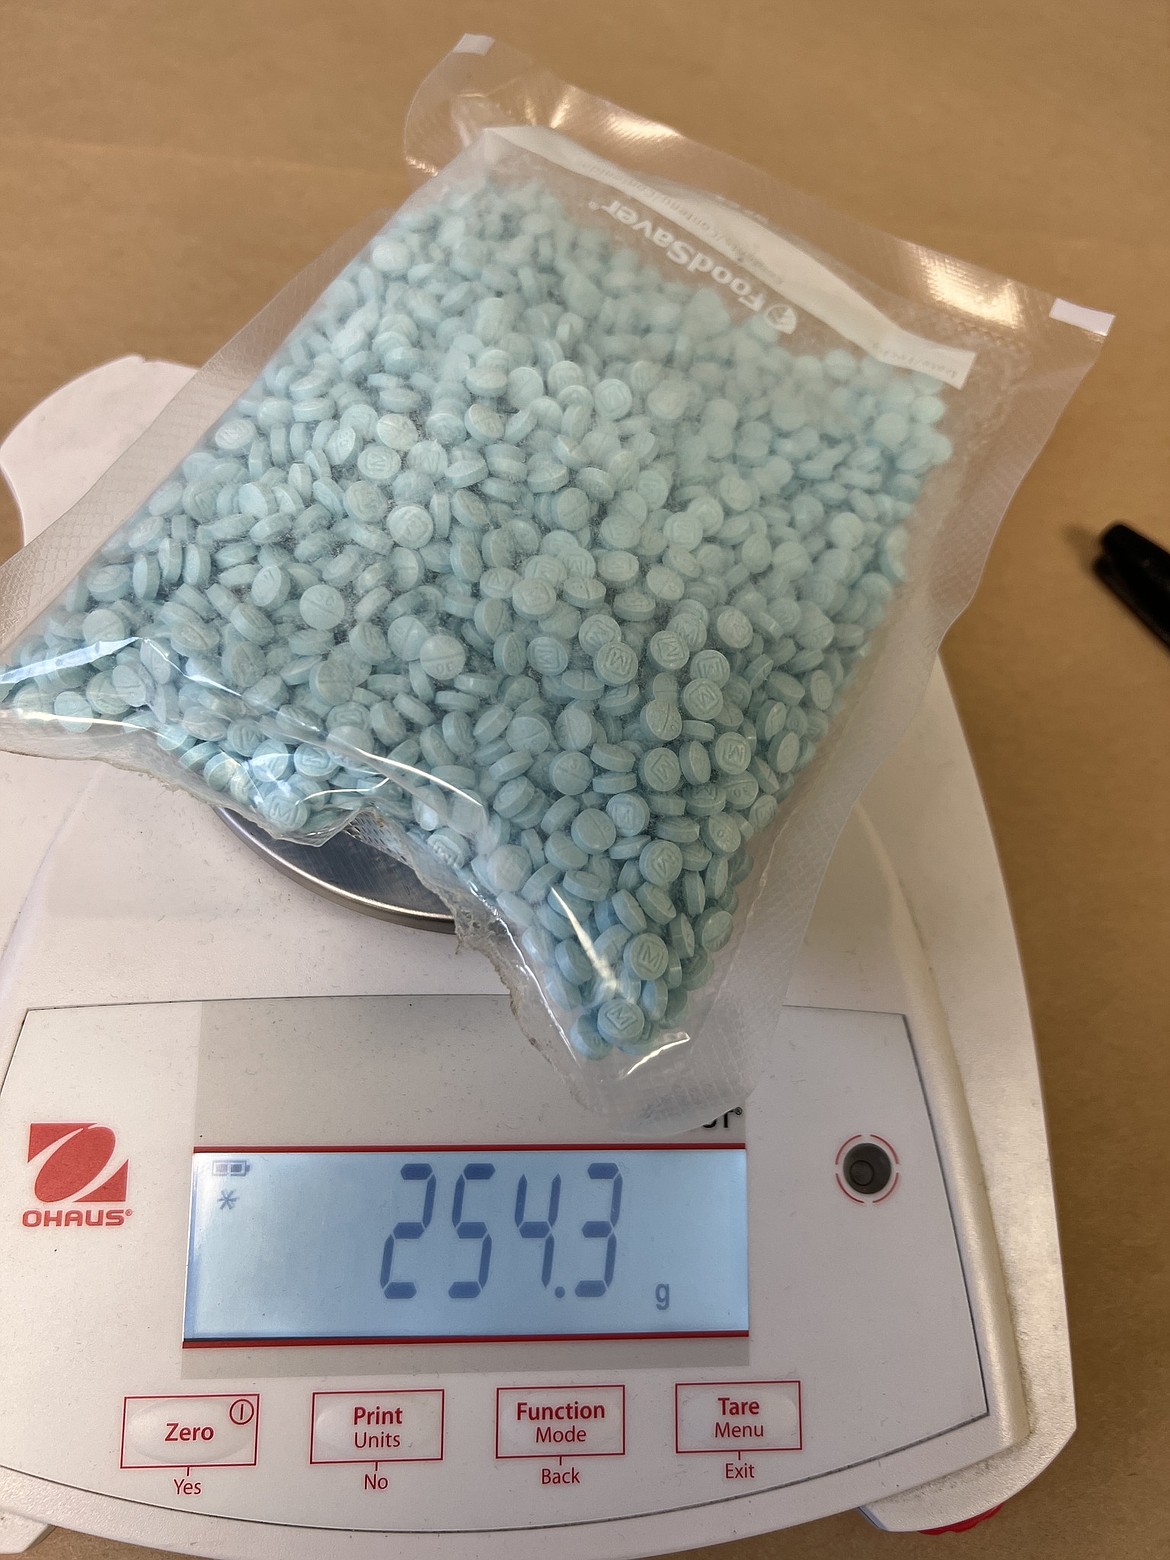 The half-pound of fentanyl – around 3,000 pills – seized by Moses Lake Police Department officers following the arrest of Dustin Duville on Saturday. Methamphetamine, powdered fentanyl and at least one reportedly stolen motorcycle were also found in the investigation.